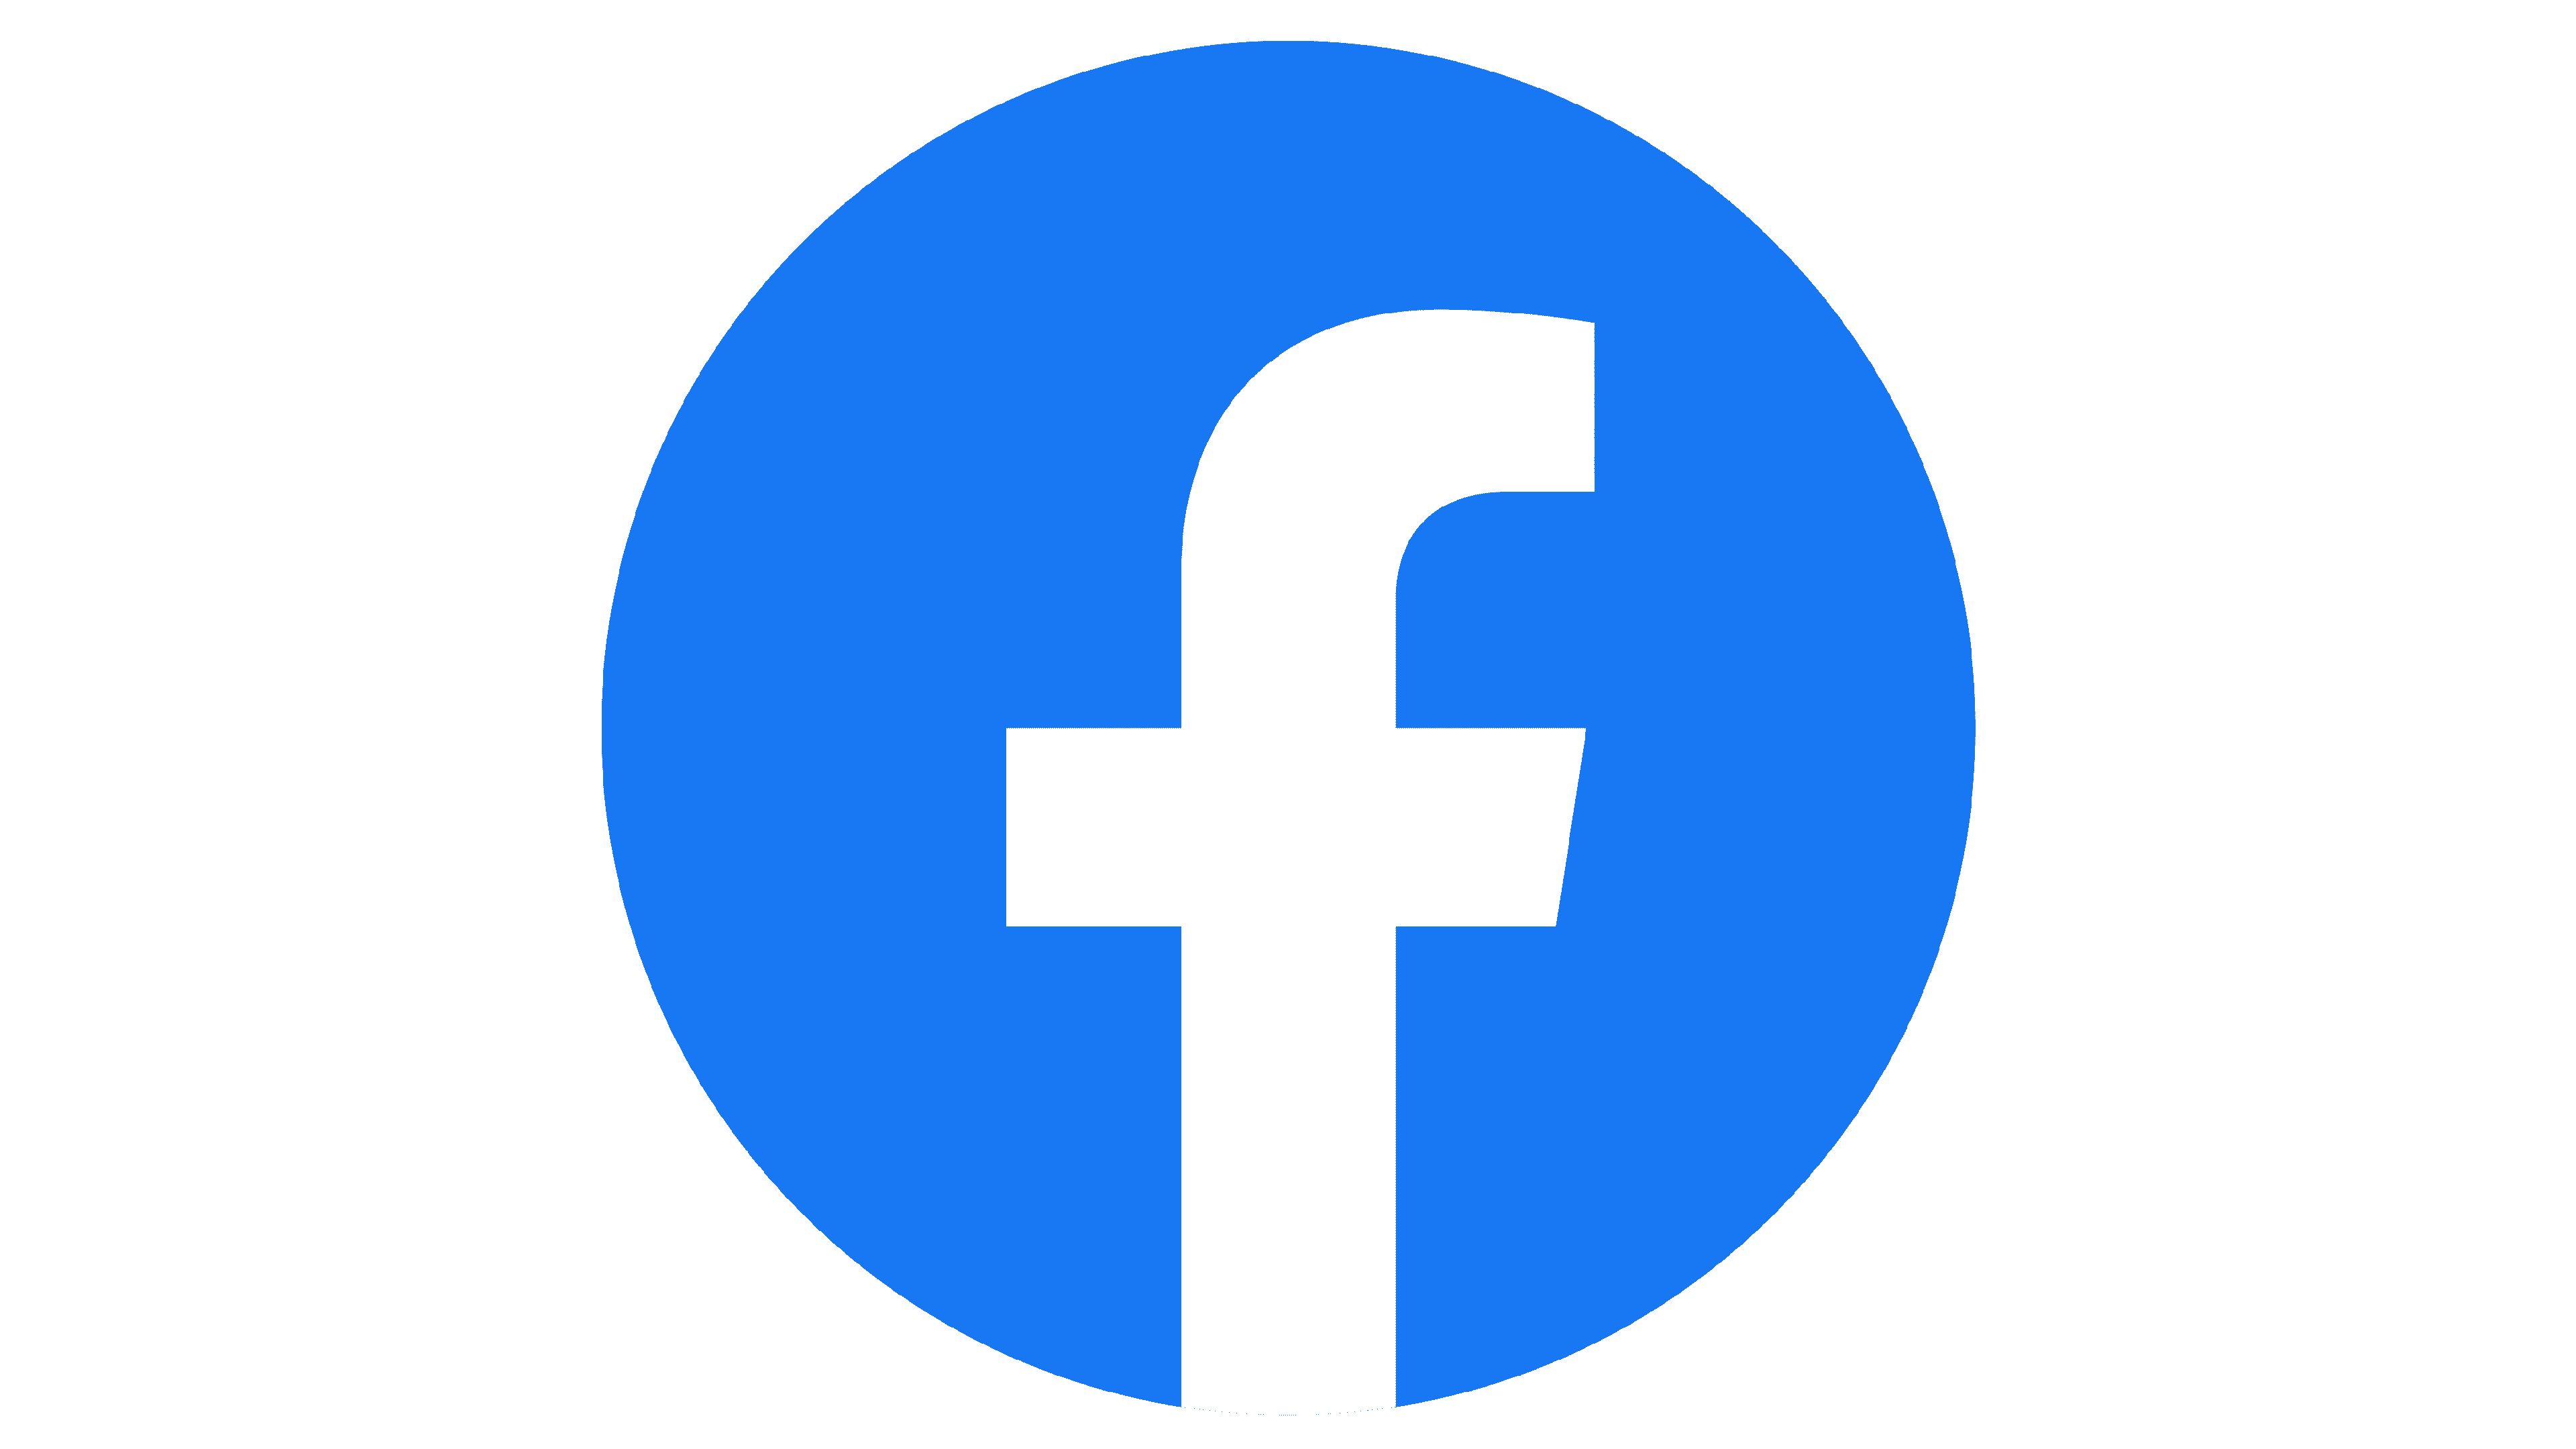 Facebook LOGO high quality PNG format | Facebook icons, App, Android apps